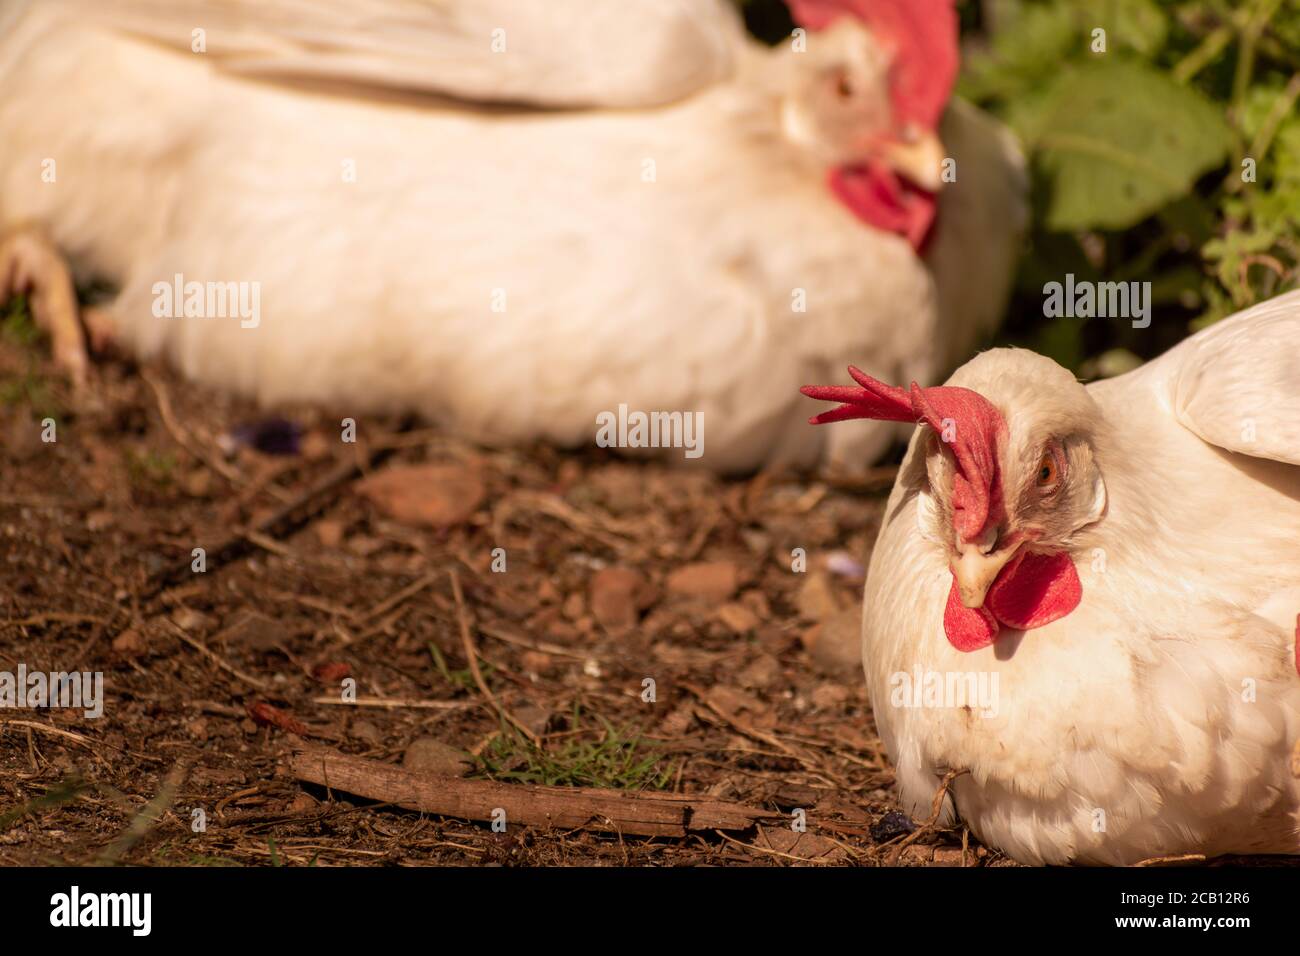 White leghorn chickens hens napping Stock Photo